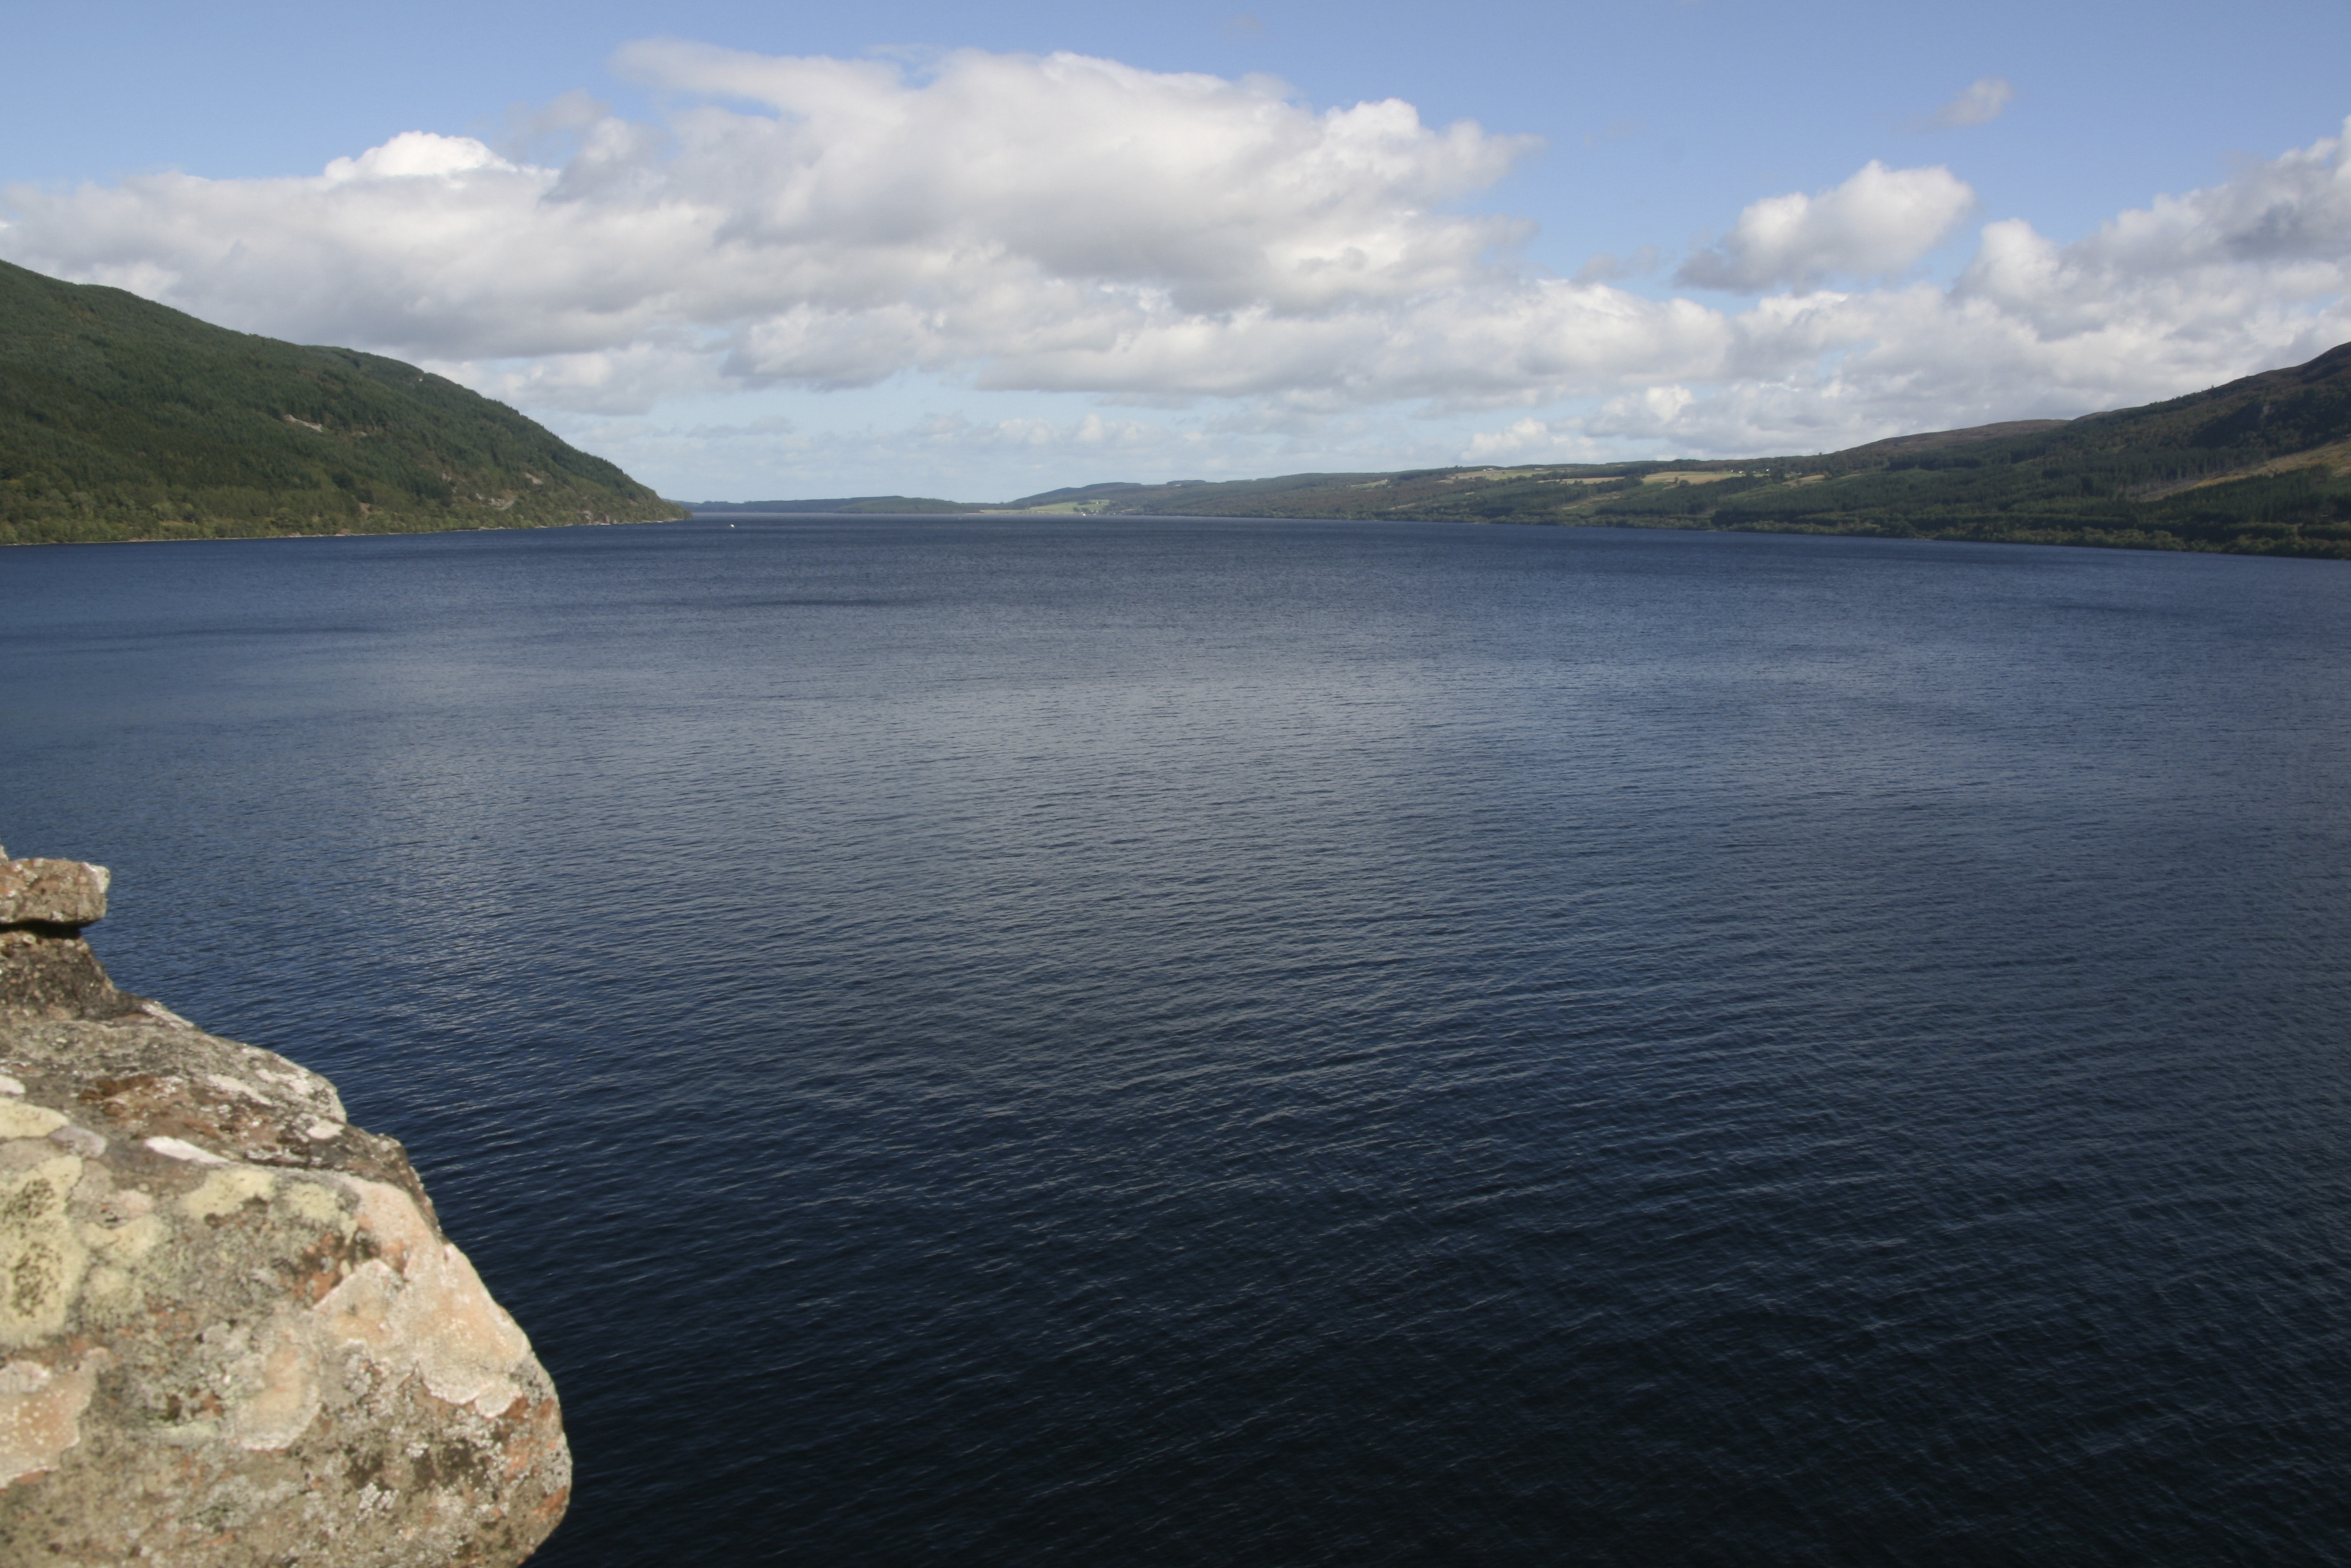 A pleasant day at Loch Ness